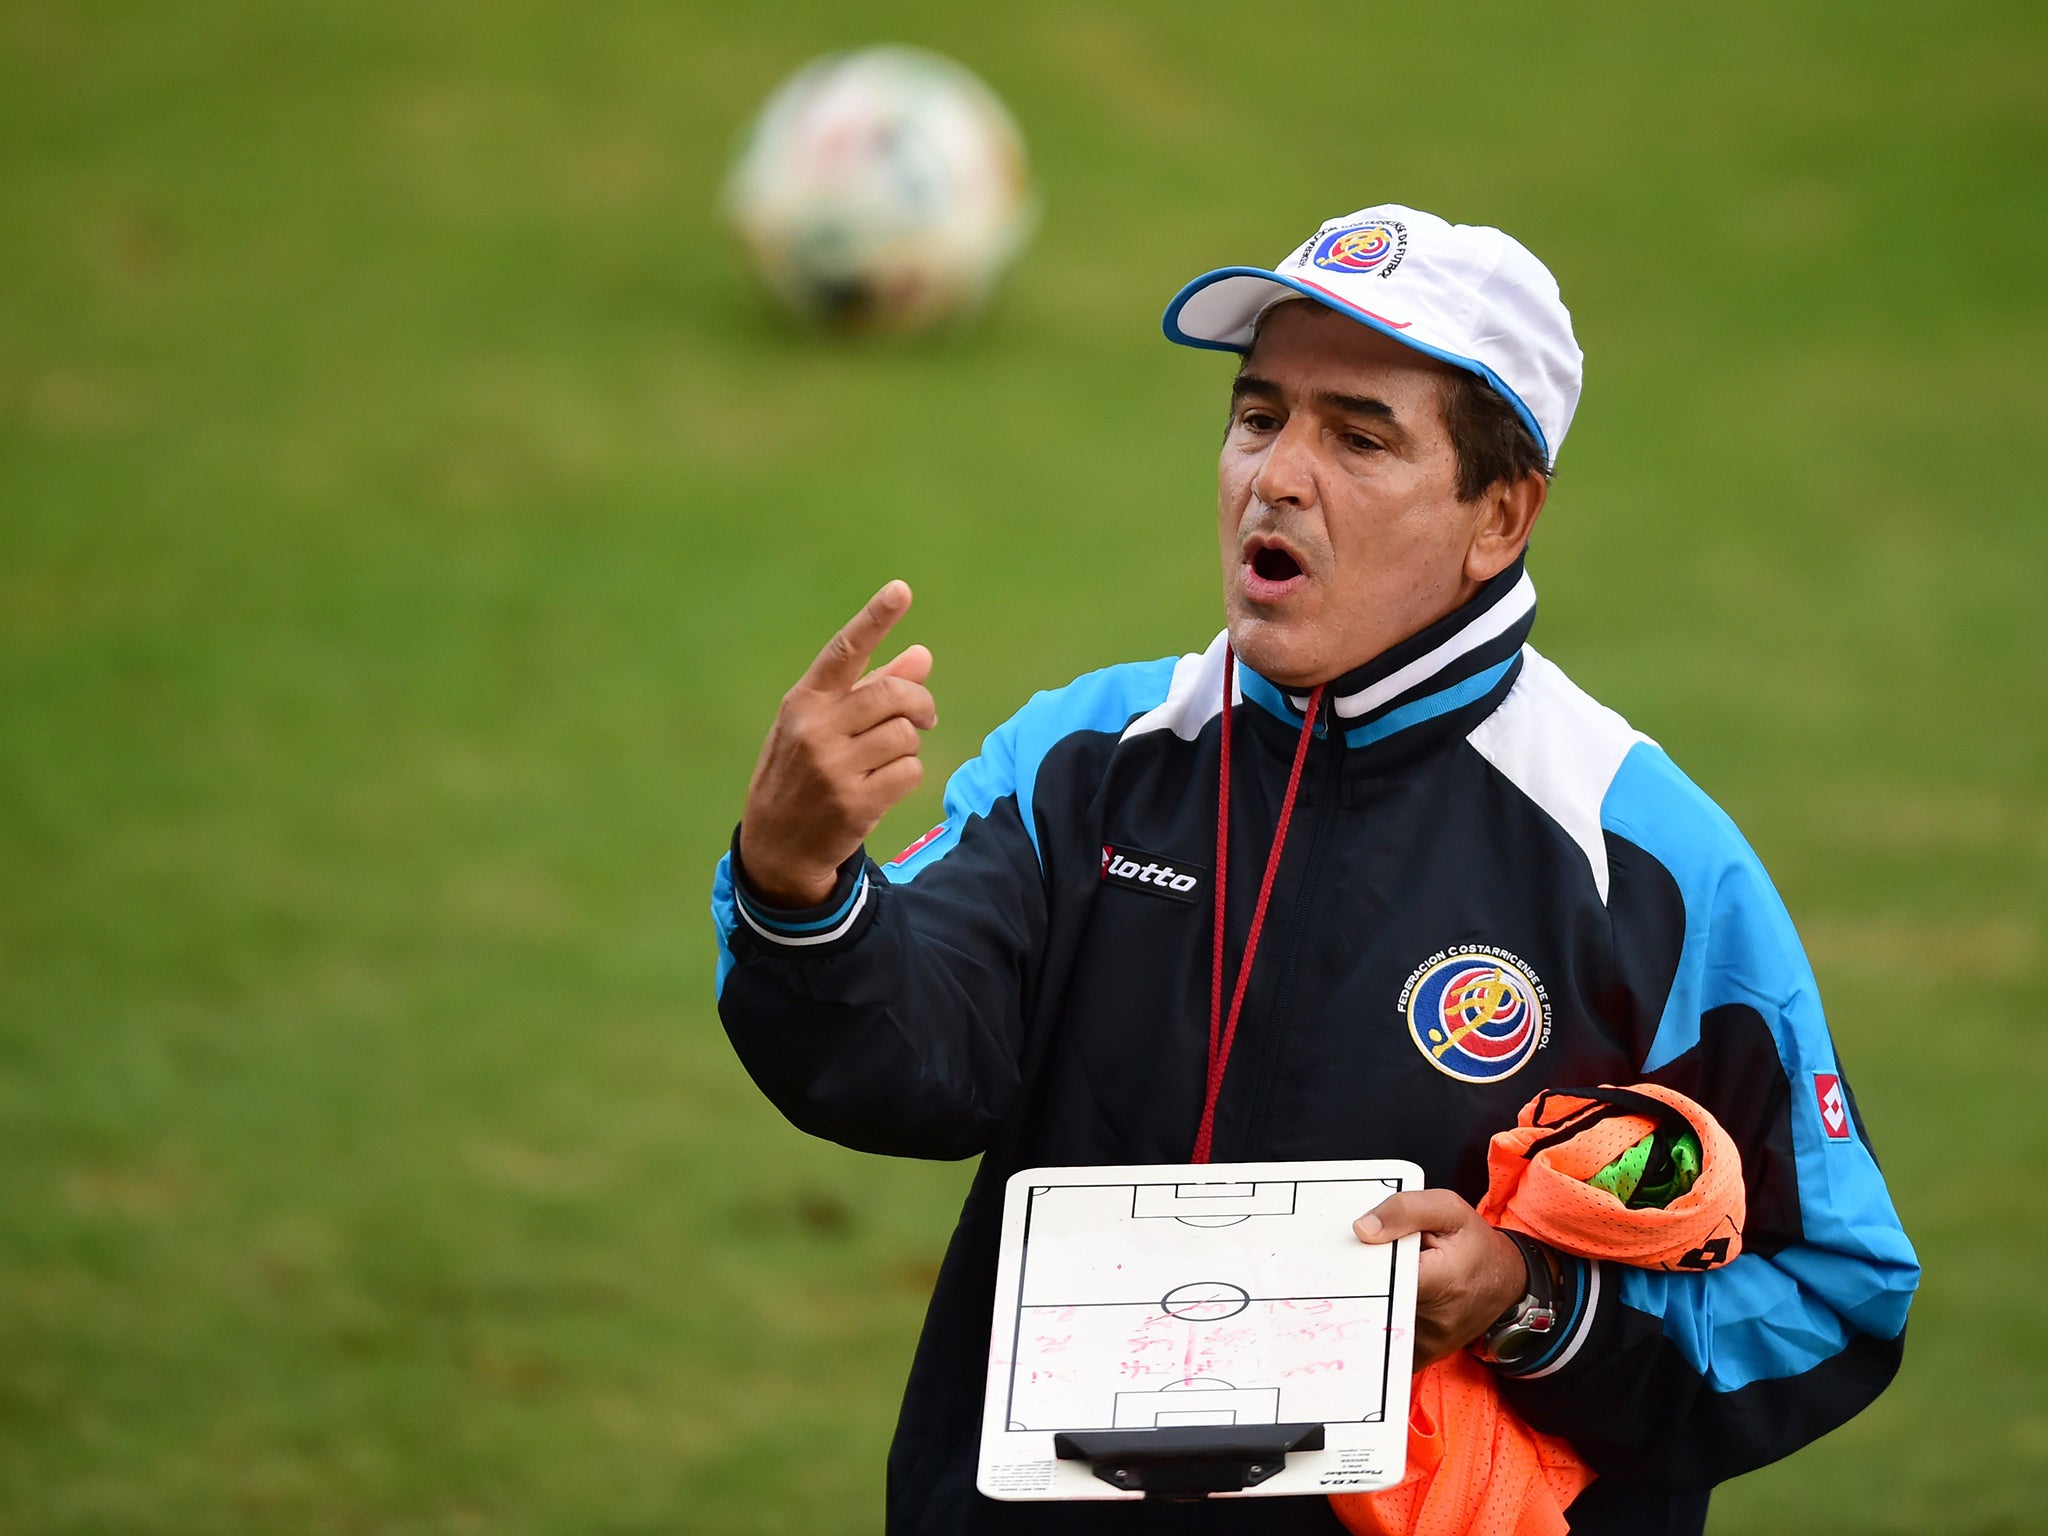 Costa Rica manager Jorge Luis Pinto